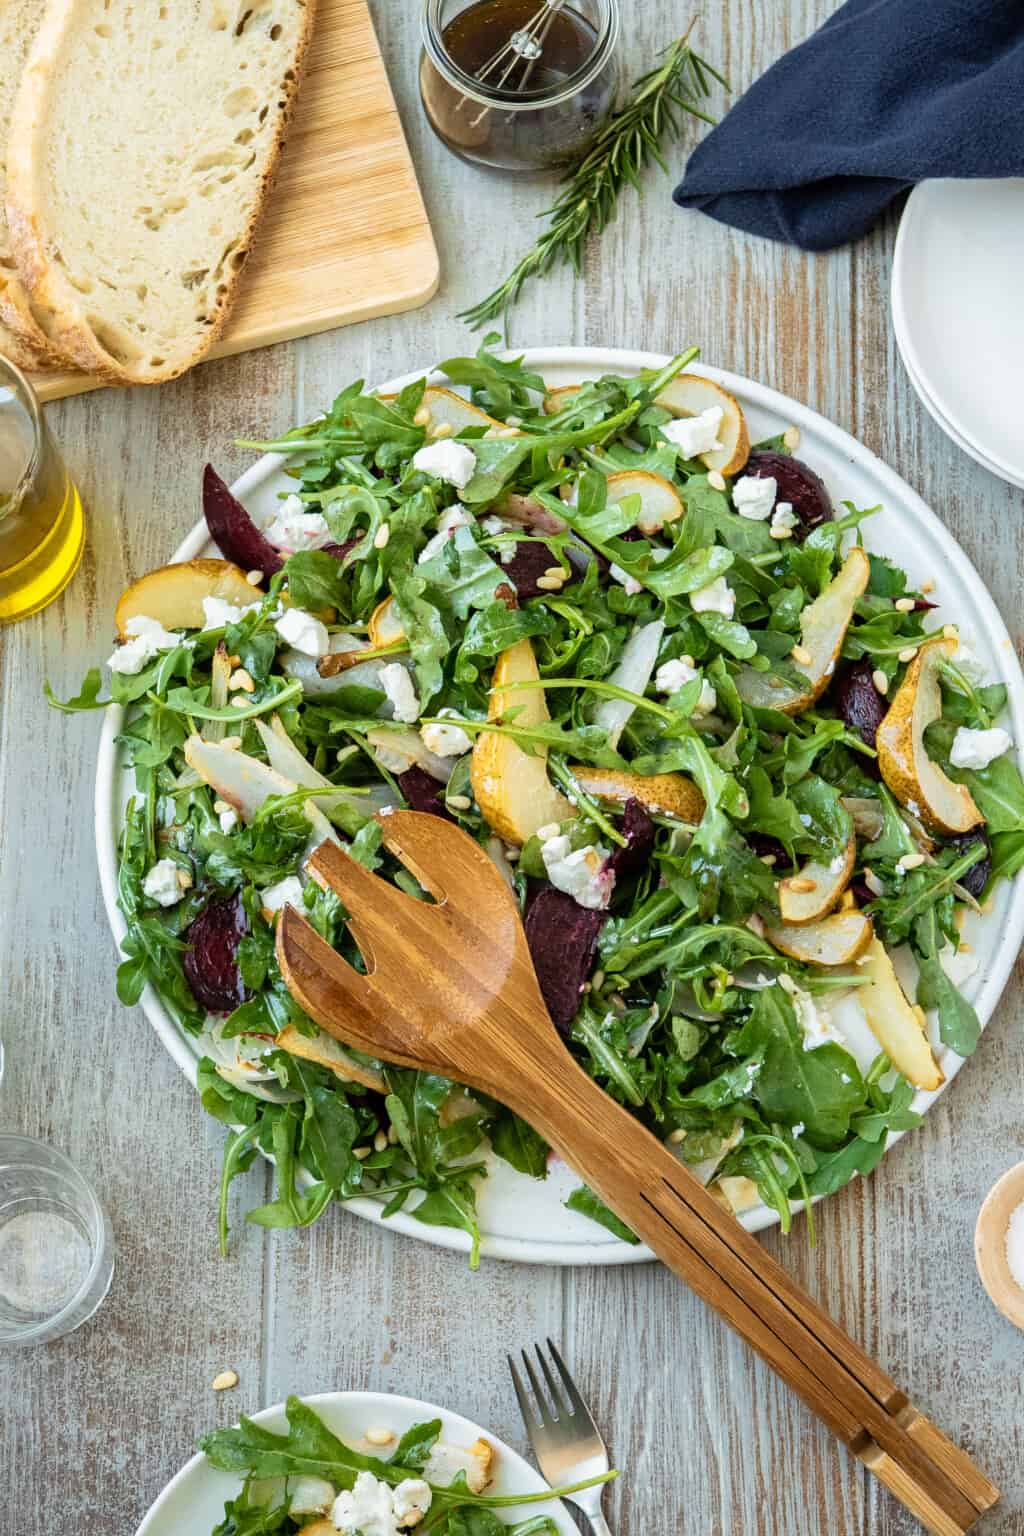 Beet and Goat Cheese Salad | The Mediterranean Dish